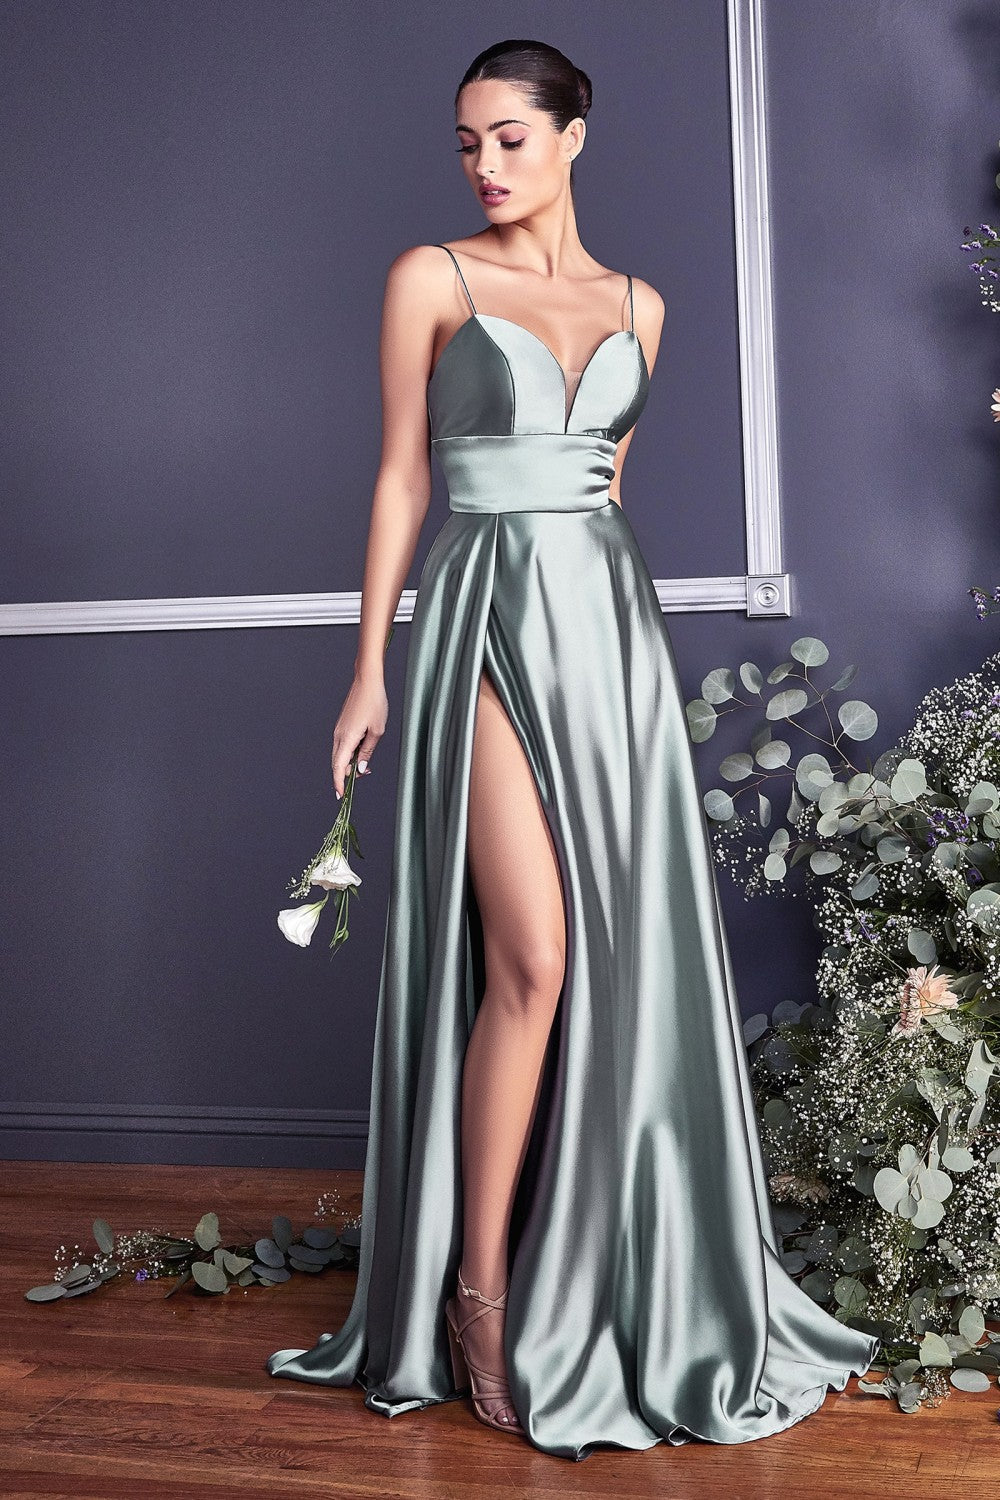 A-line Satin Prom & Bridesmaid Gown Illusion V-neckline Strap Dress Fitted on a waist style with Hugh Leg Slit CDCJ523 Elsy Style Evening Dress